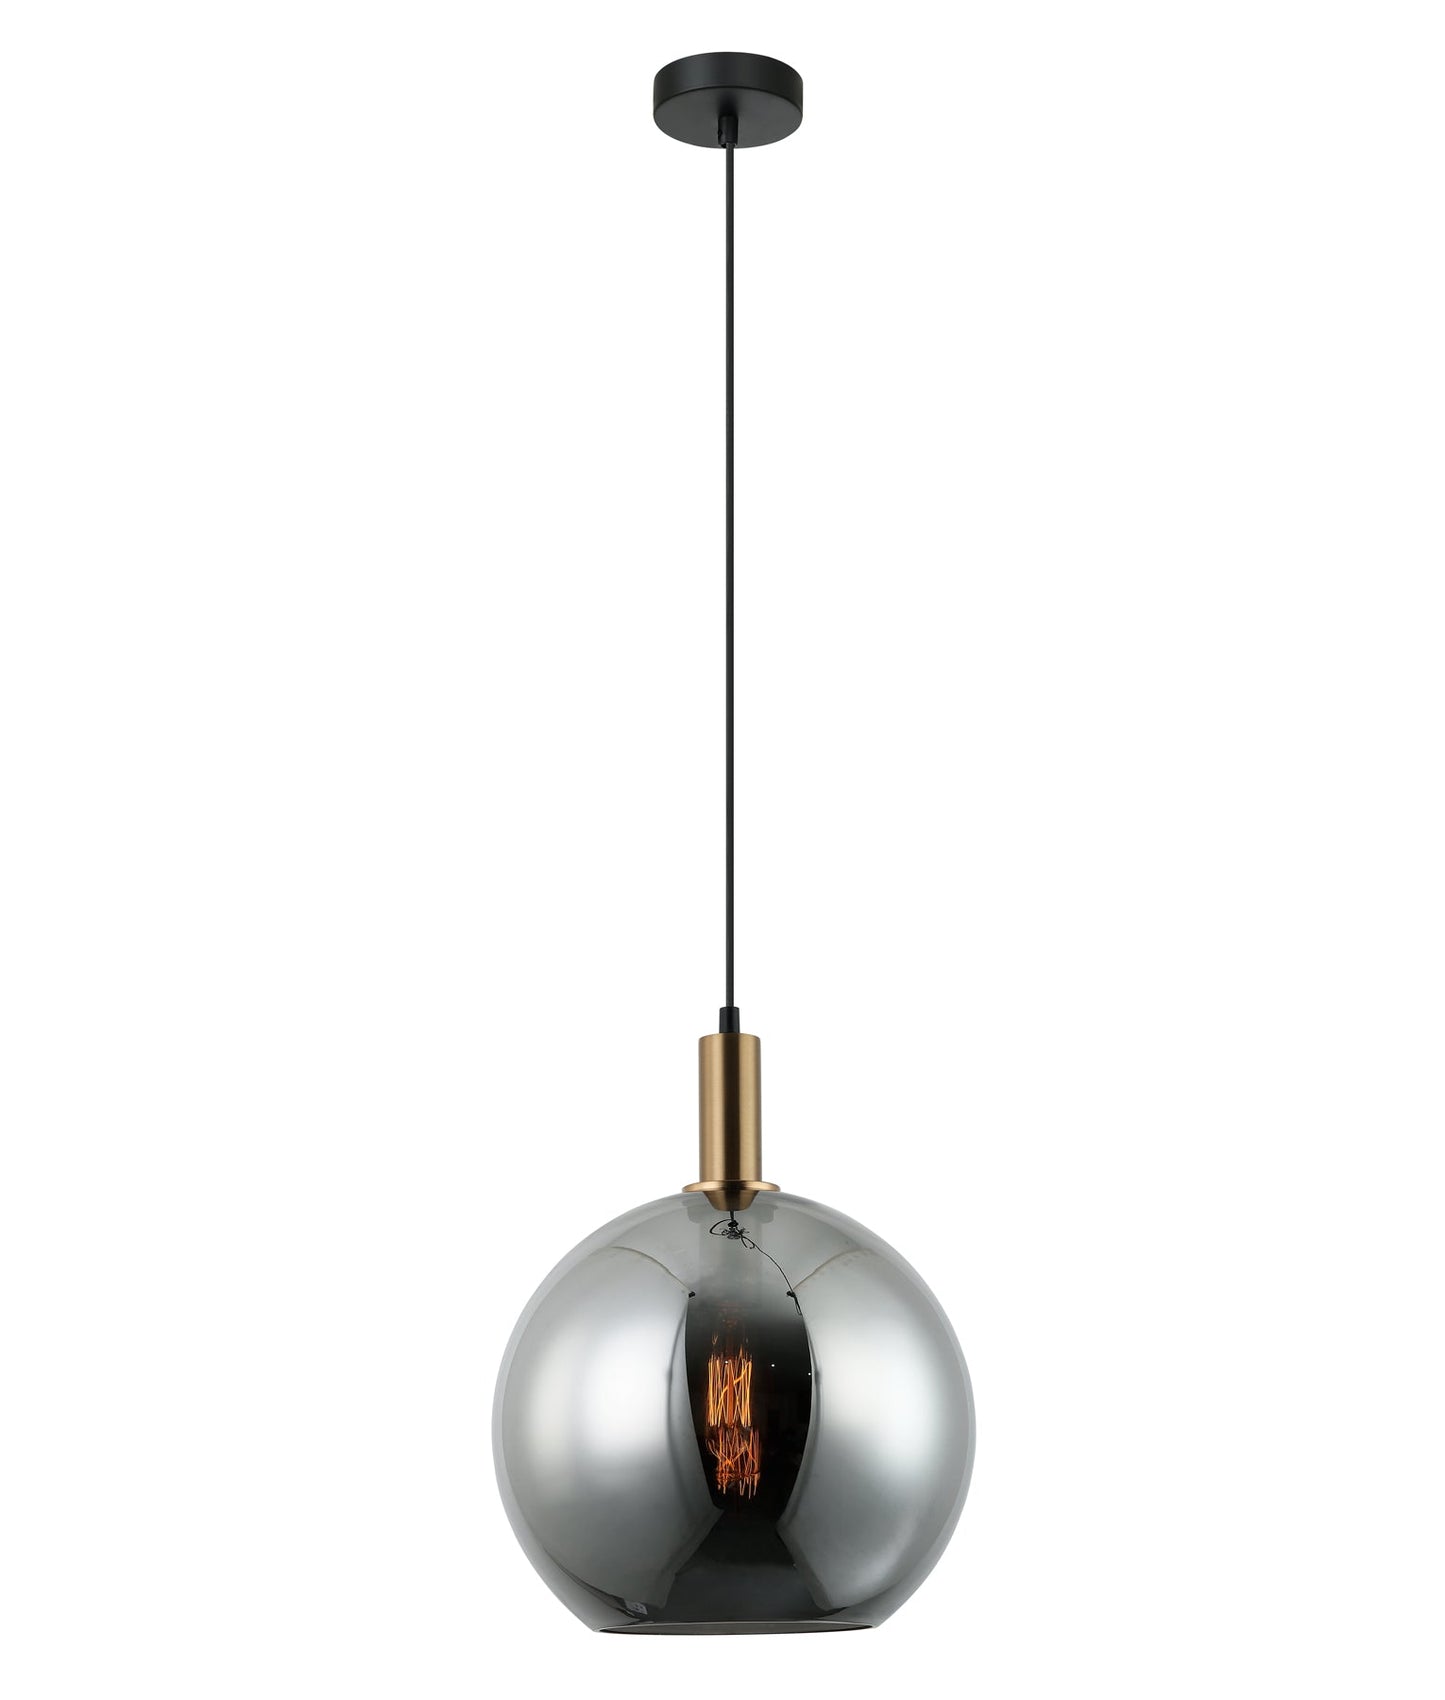 PATERA: Interior Glass with Extended Bronze Highlight Pendant Lights